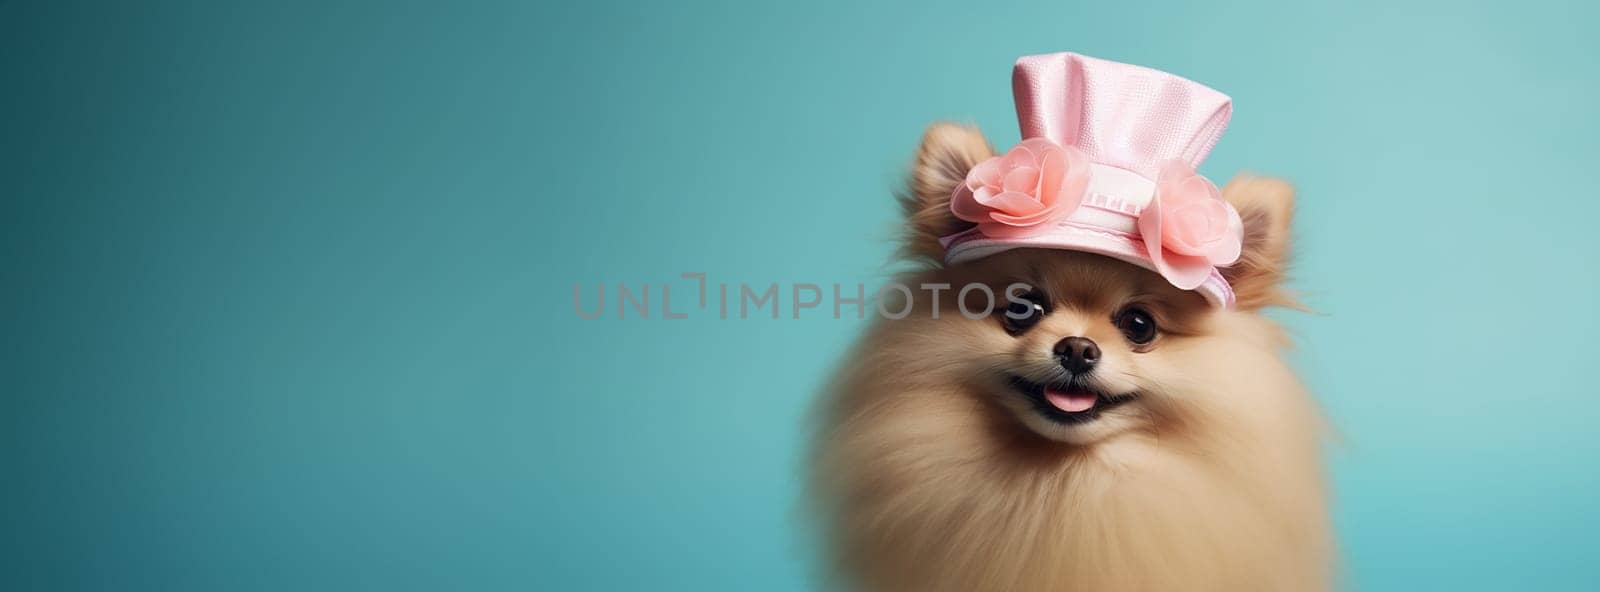 Cute red fluffy spitz with open mouth and pink tongue wearing hat with a peach flower on a blue background, Easter pet by KaterinaDalemans